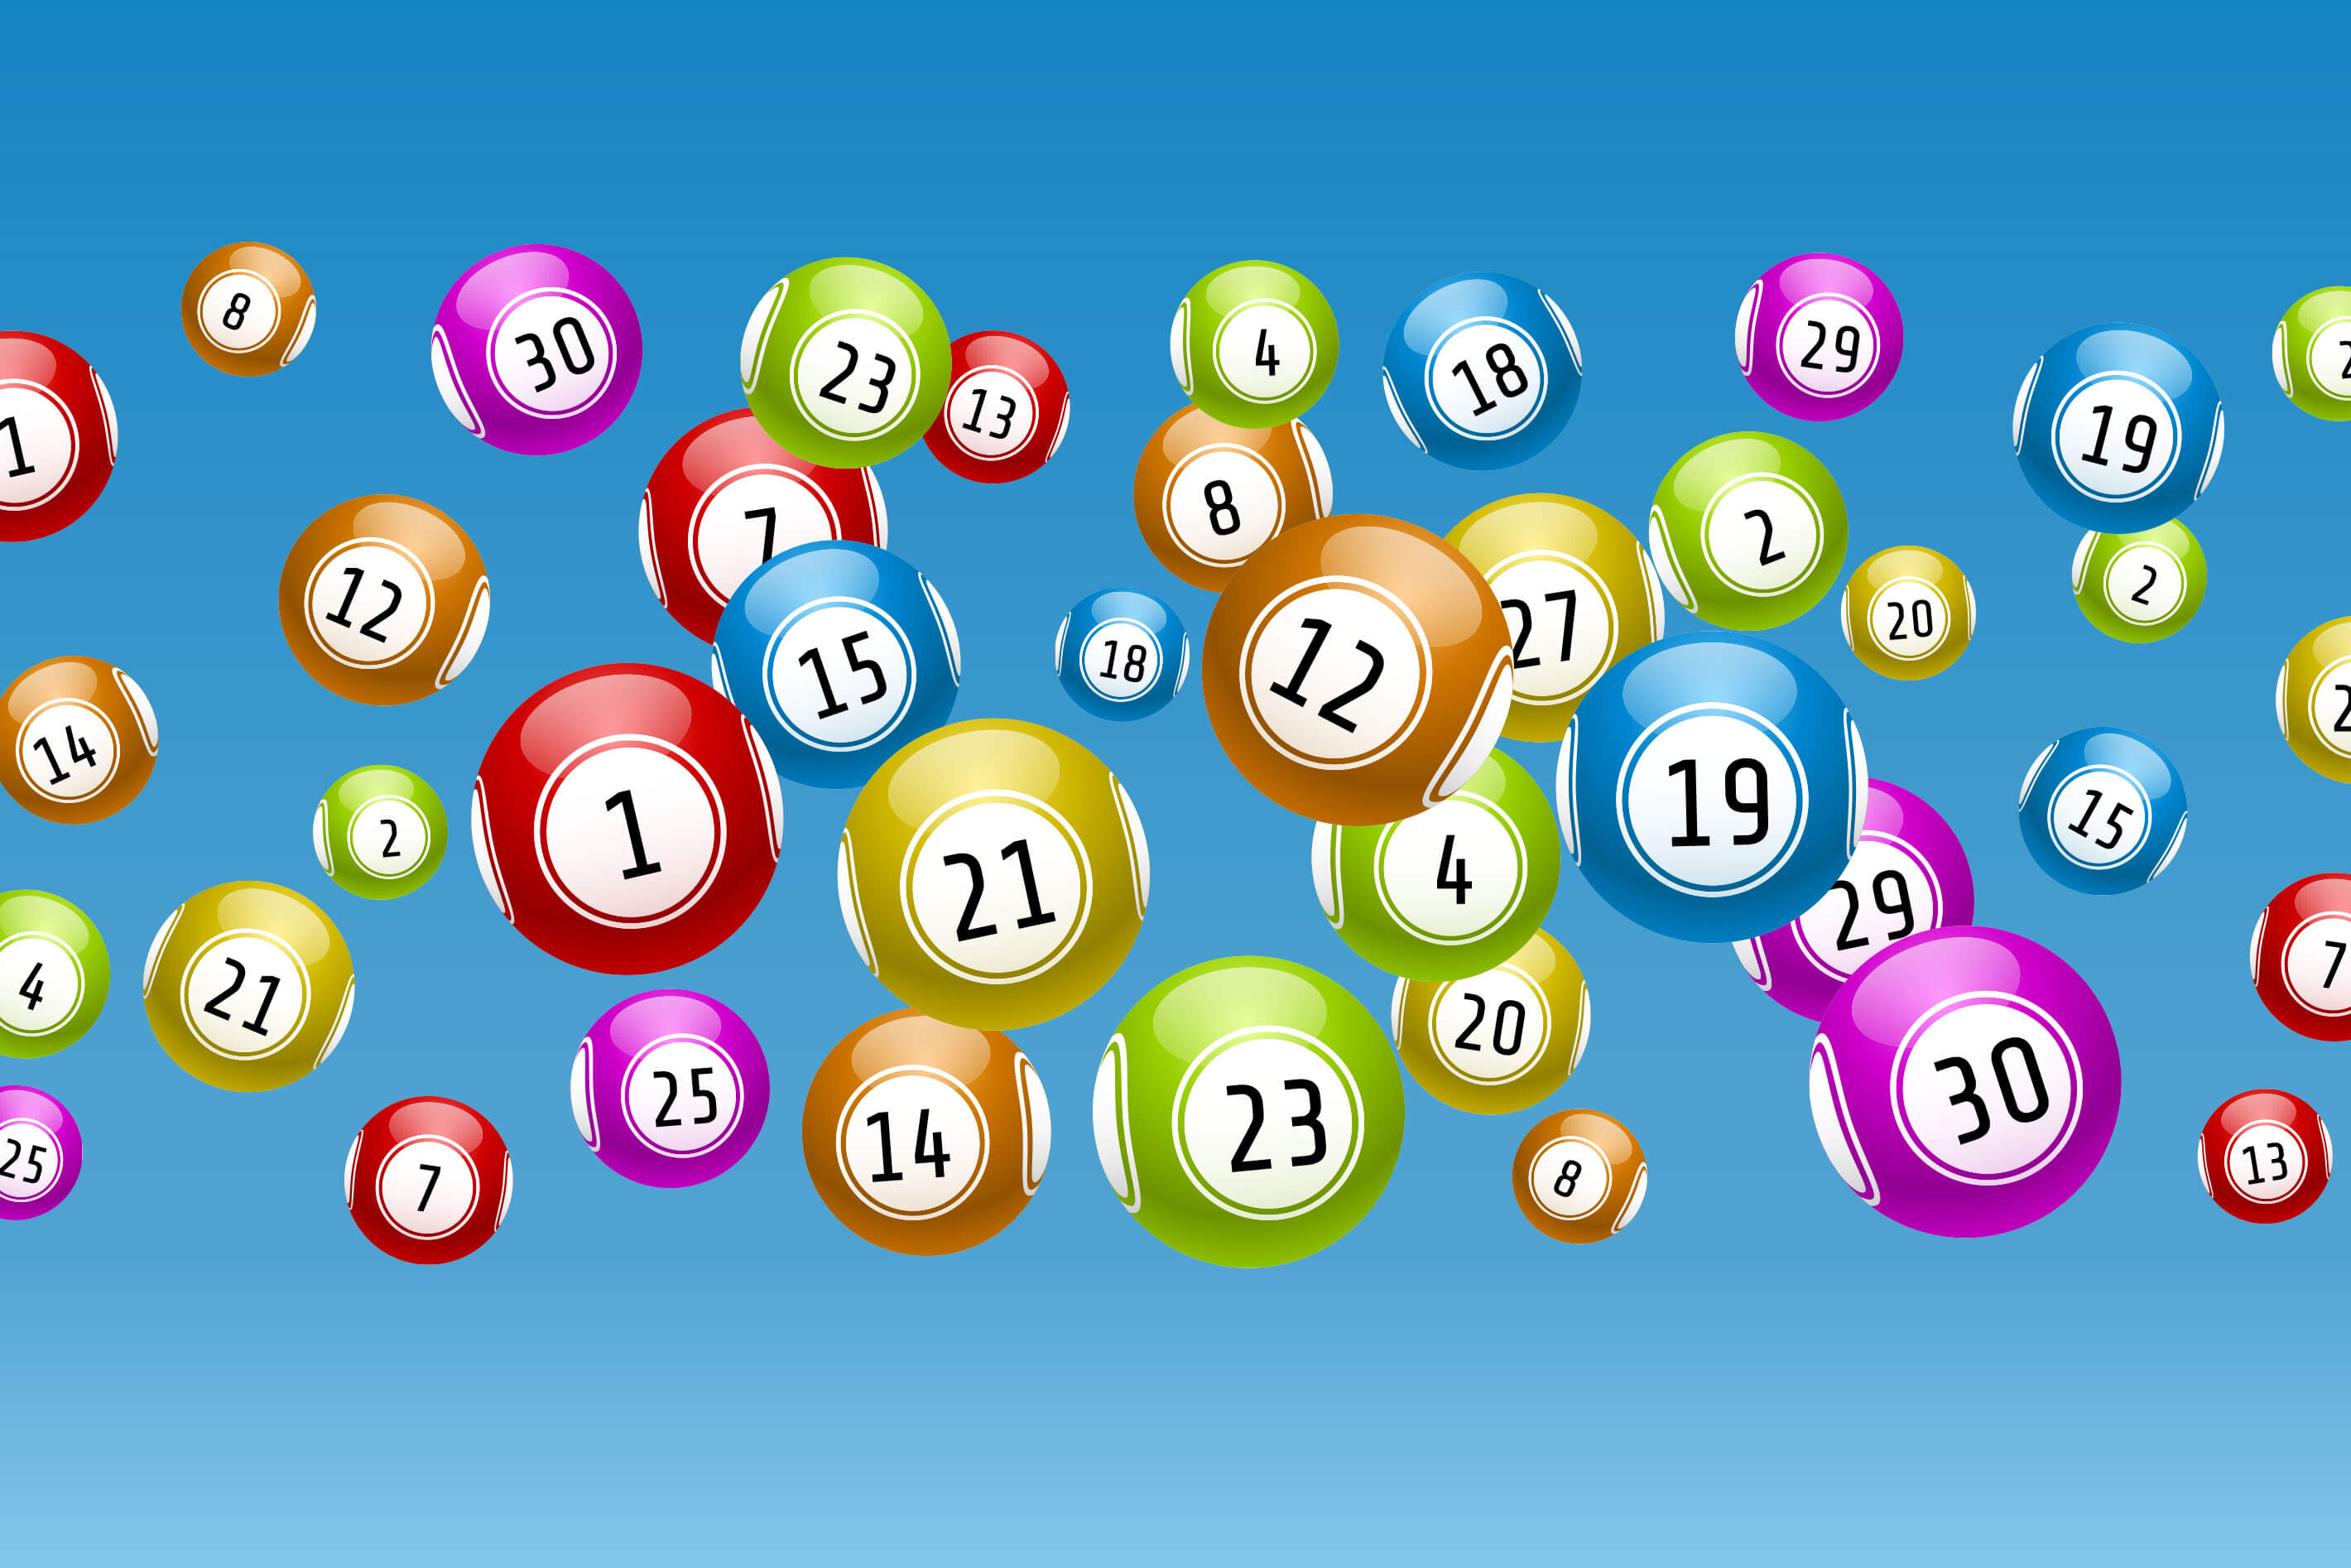 lucky lotto numbers for aries 2019